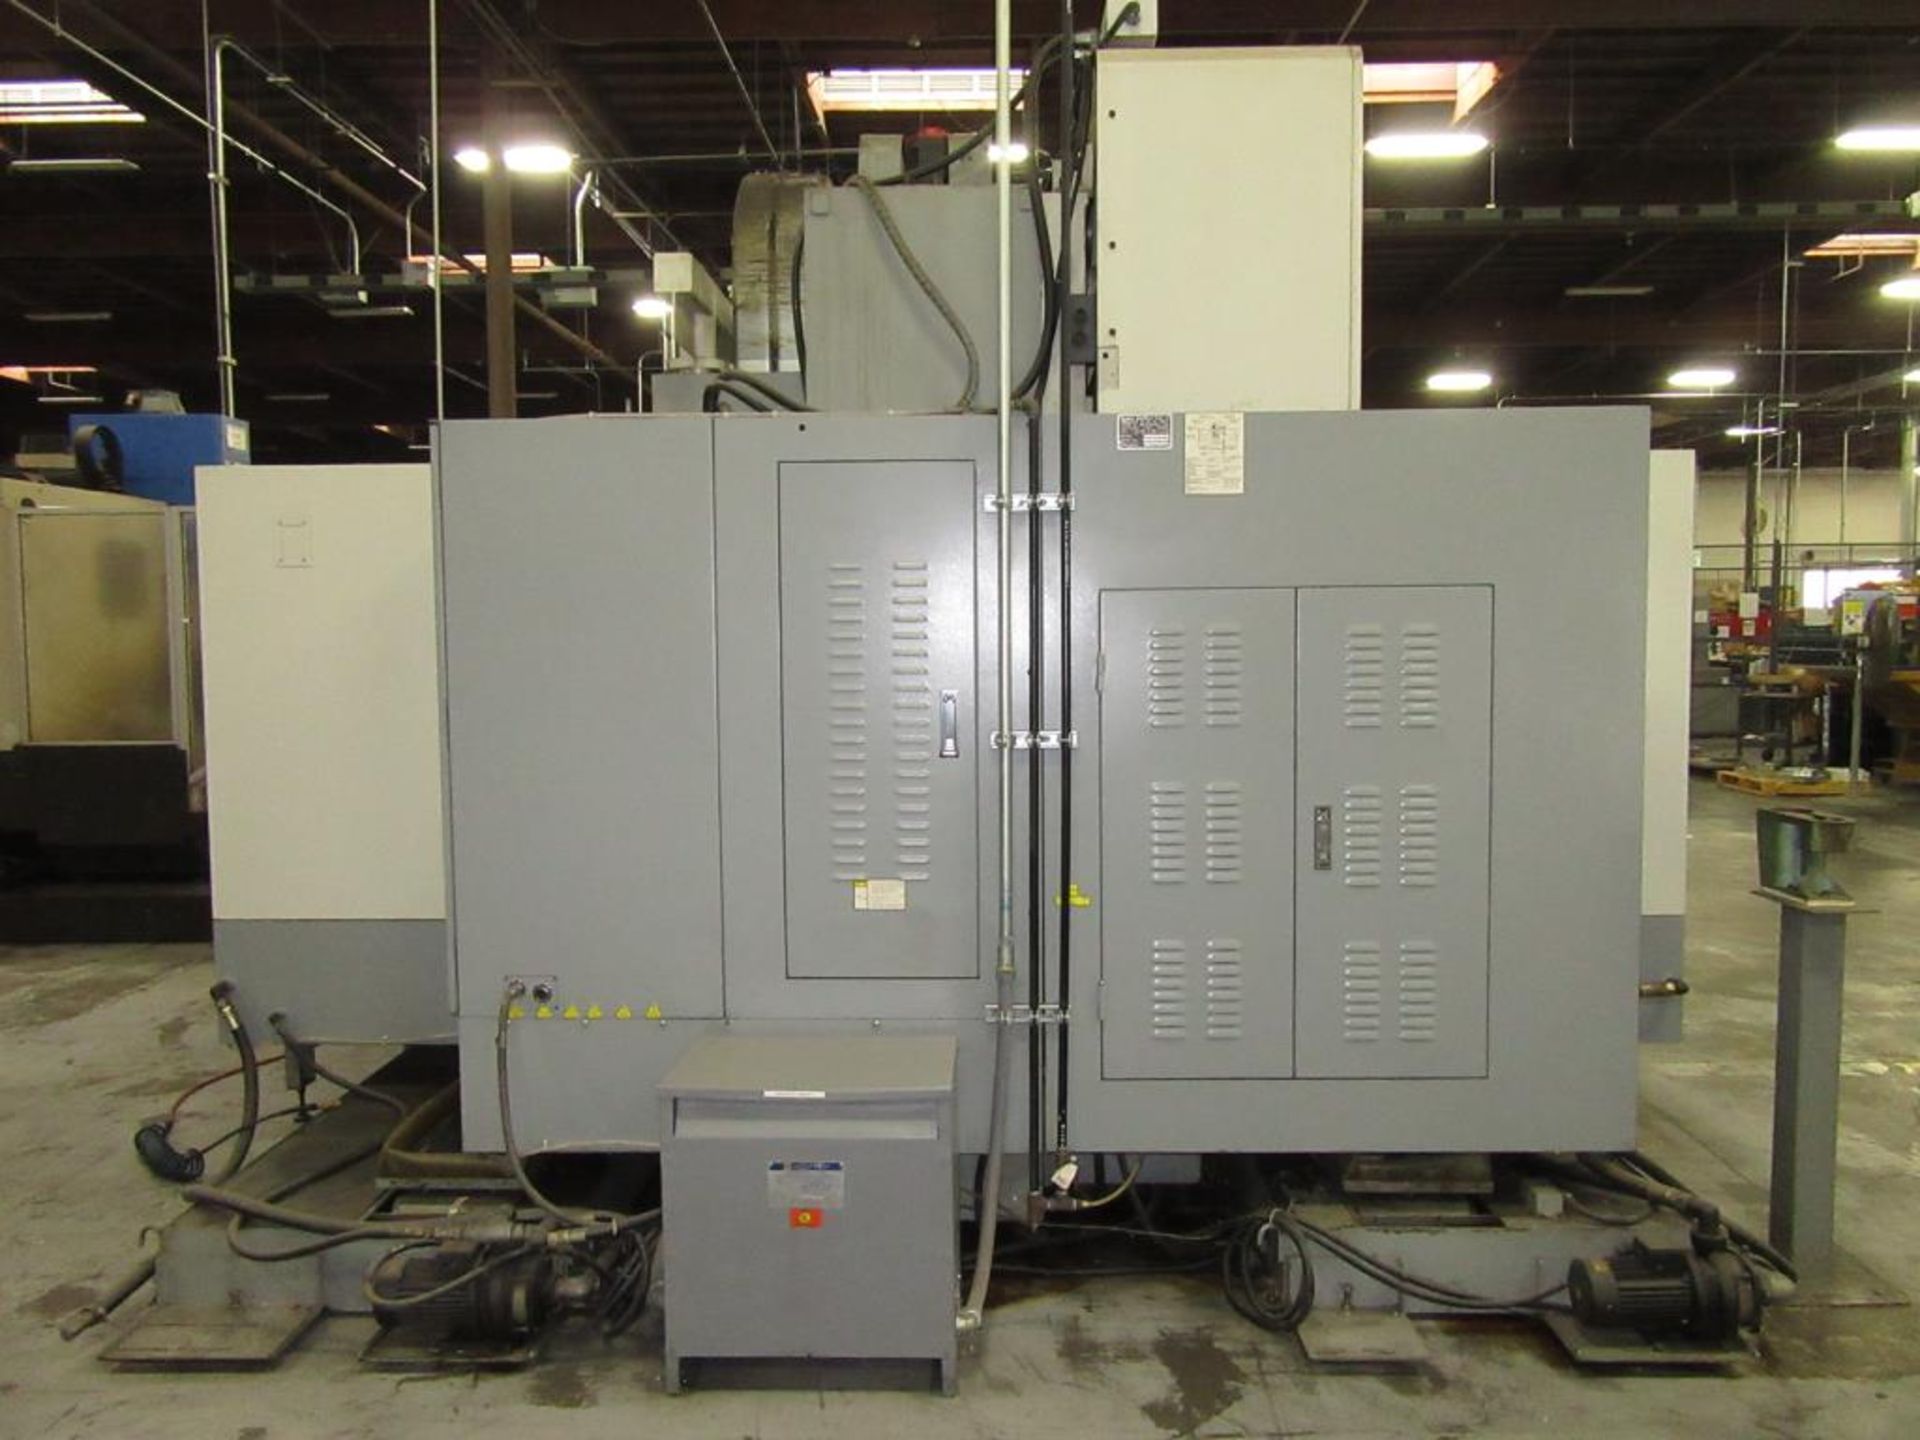 Mighty Viper VMC-1600A. 2006 - CNC Vertical Machining Center with Fanuc 21i-MB 3-Axis Control Panel, - Image 21 of 22